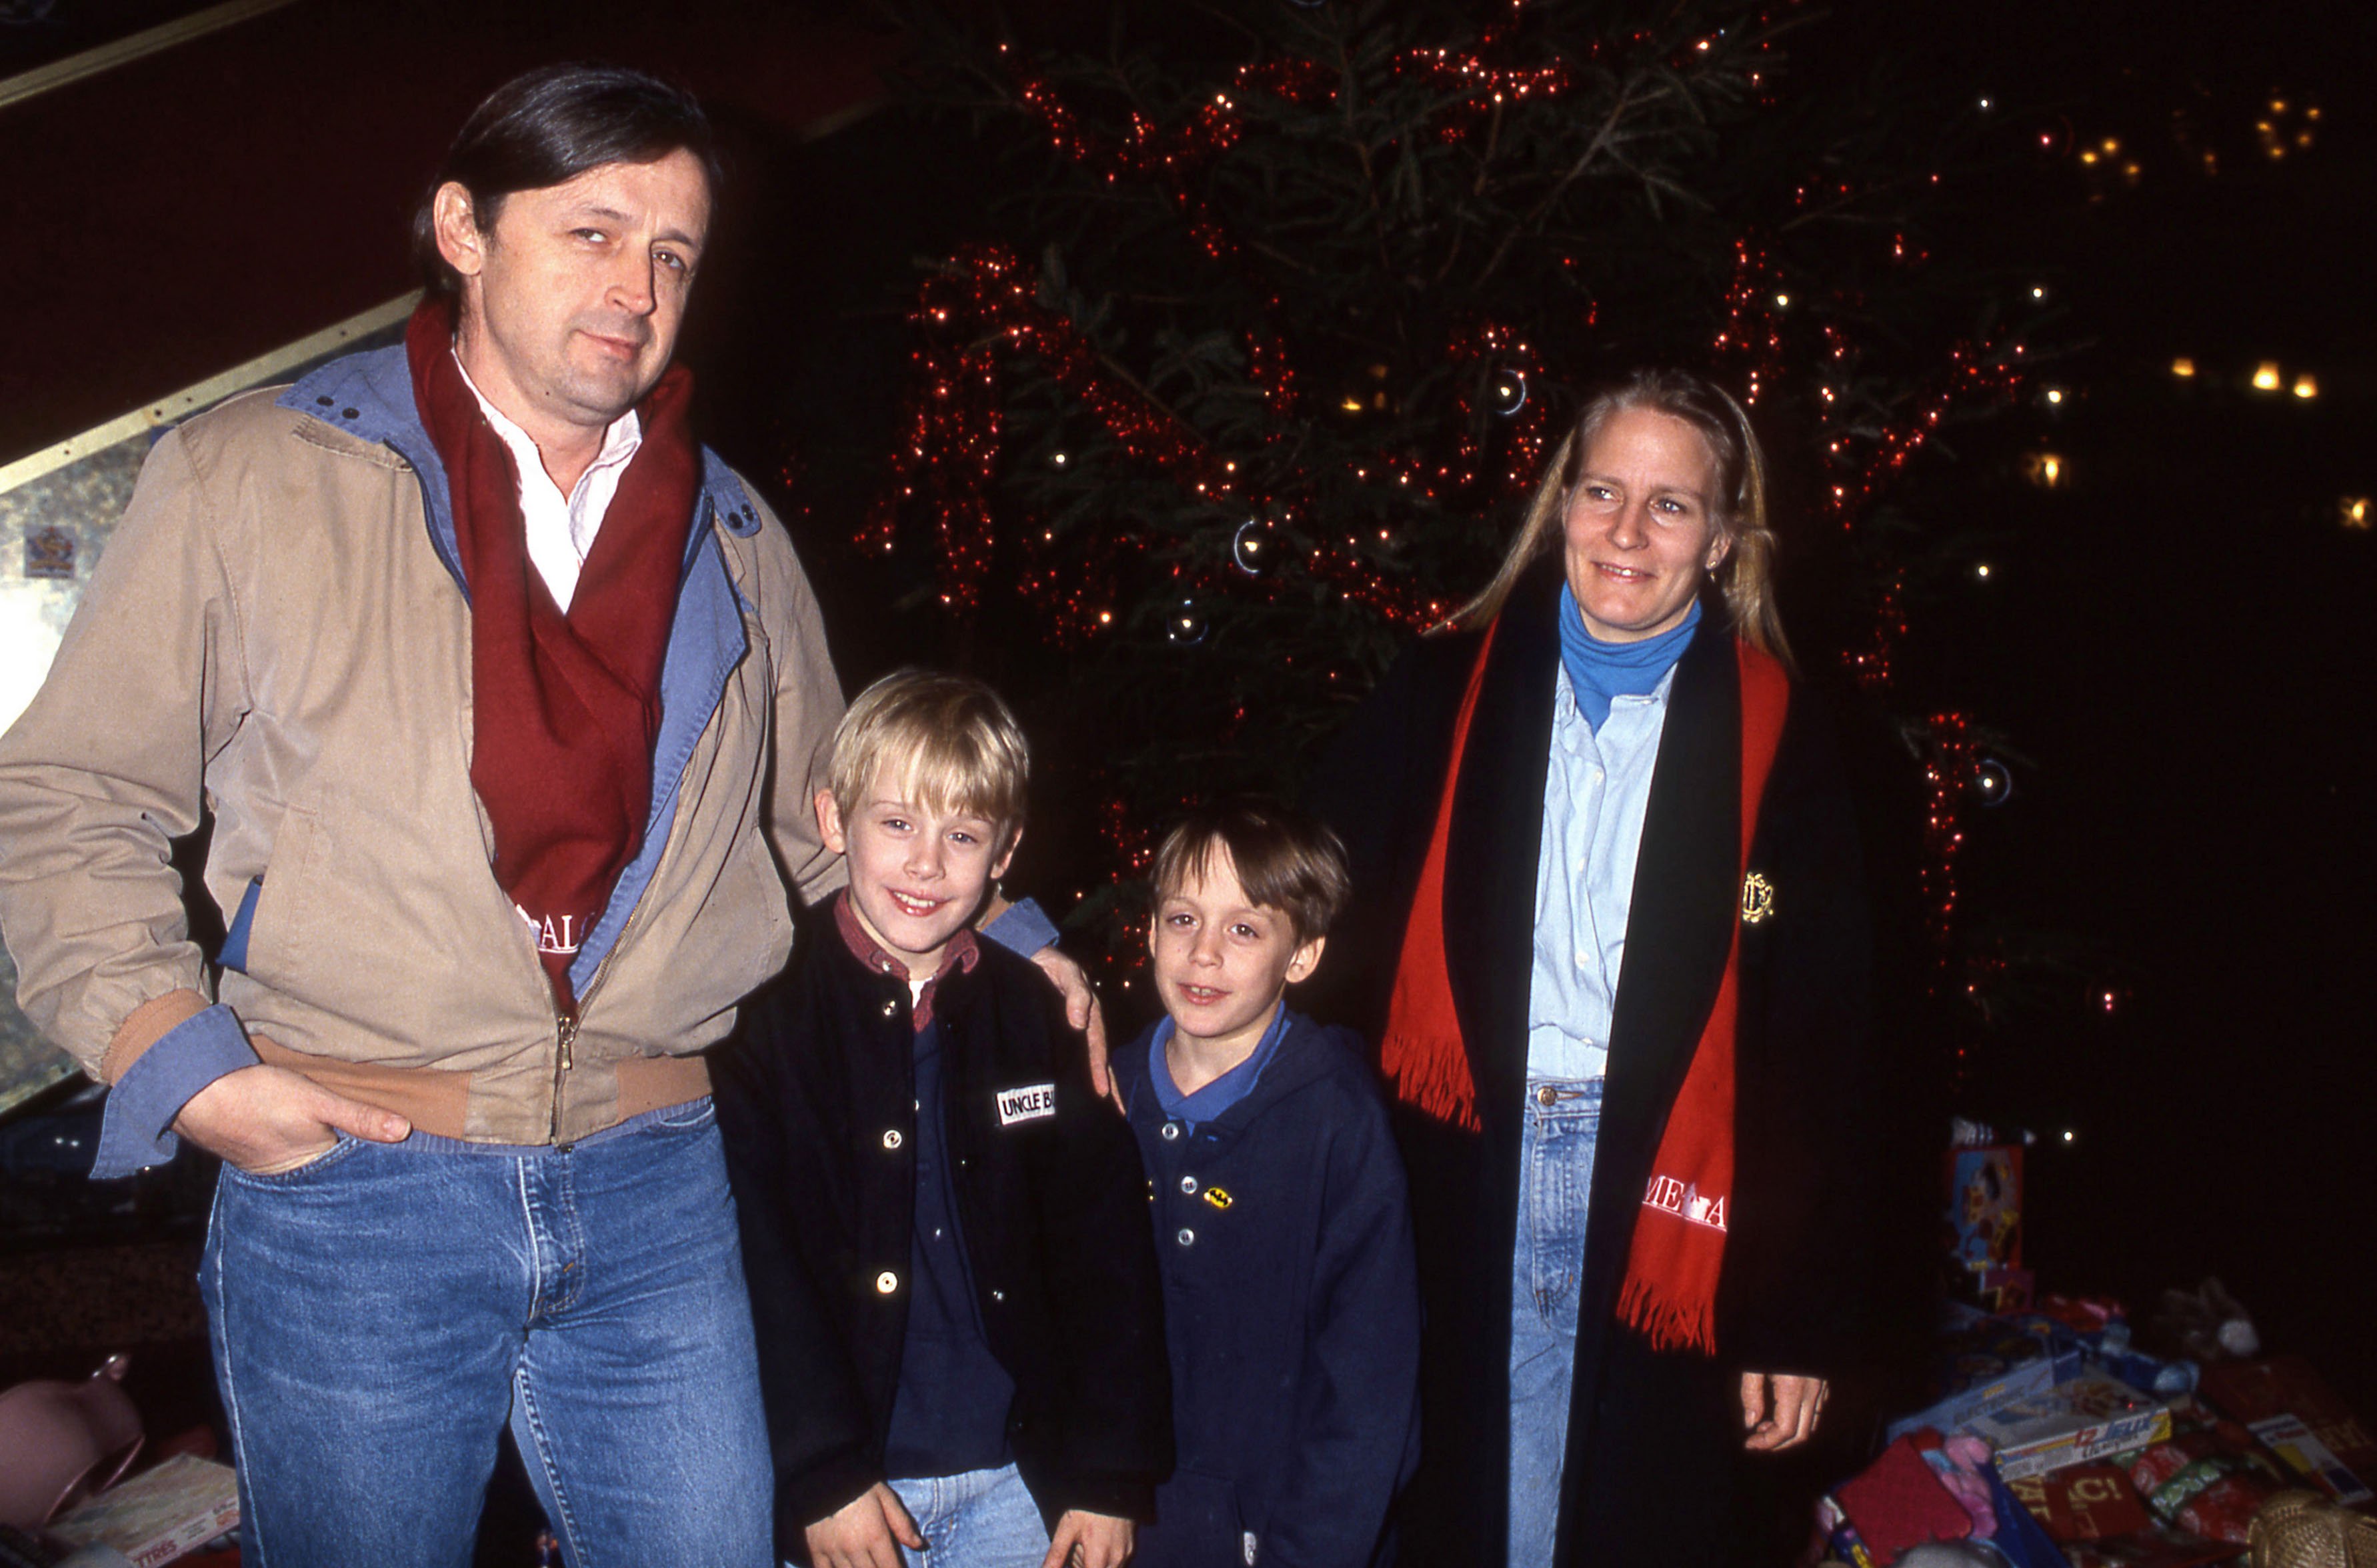 Patricia Brentrup and Kit Culkin, with their sons Macaulay Culkin and Kieran on December 11, 1990, in Paris, France | Source: Getty Images